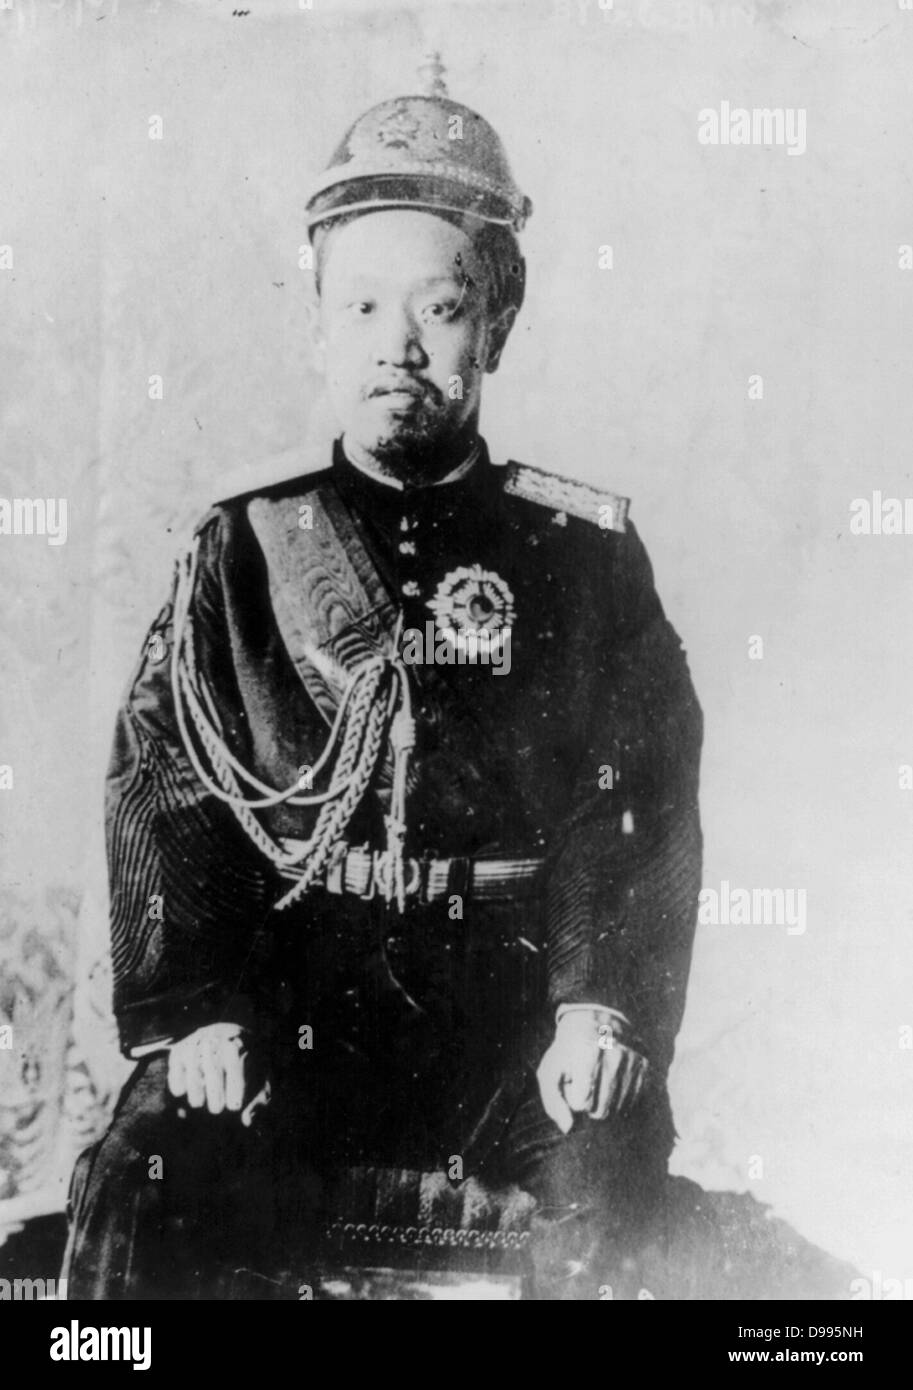 Prince Imperial Ui, the Prince Imperial of Korea, (1877 – 1955) fifth son of Emperor Gwangmu of Korea. He could not become the Crown Prince, even though he was older than his brother Prince Imperial Yeong, because the Japanese government disliked his rebellious nature. He was appointed special ambassador to Japan. Stock Photo